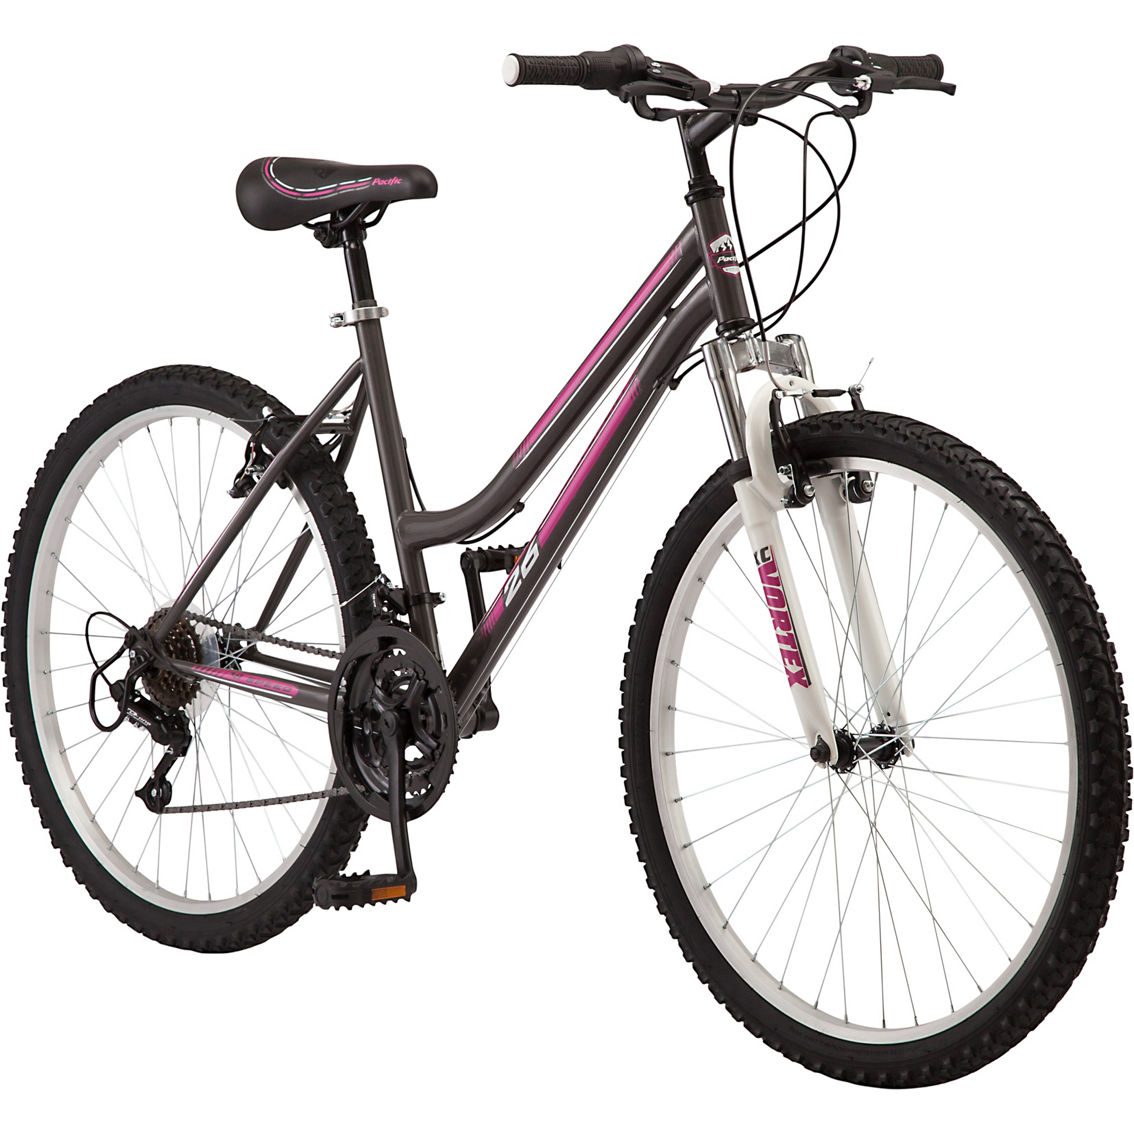 Pacific Women's Mountain Sport 26 in. Front Suspension Mountain Bike - Image 2 of 10